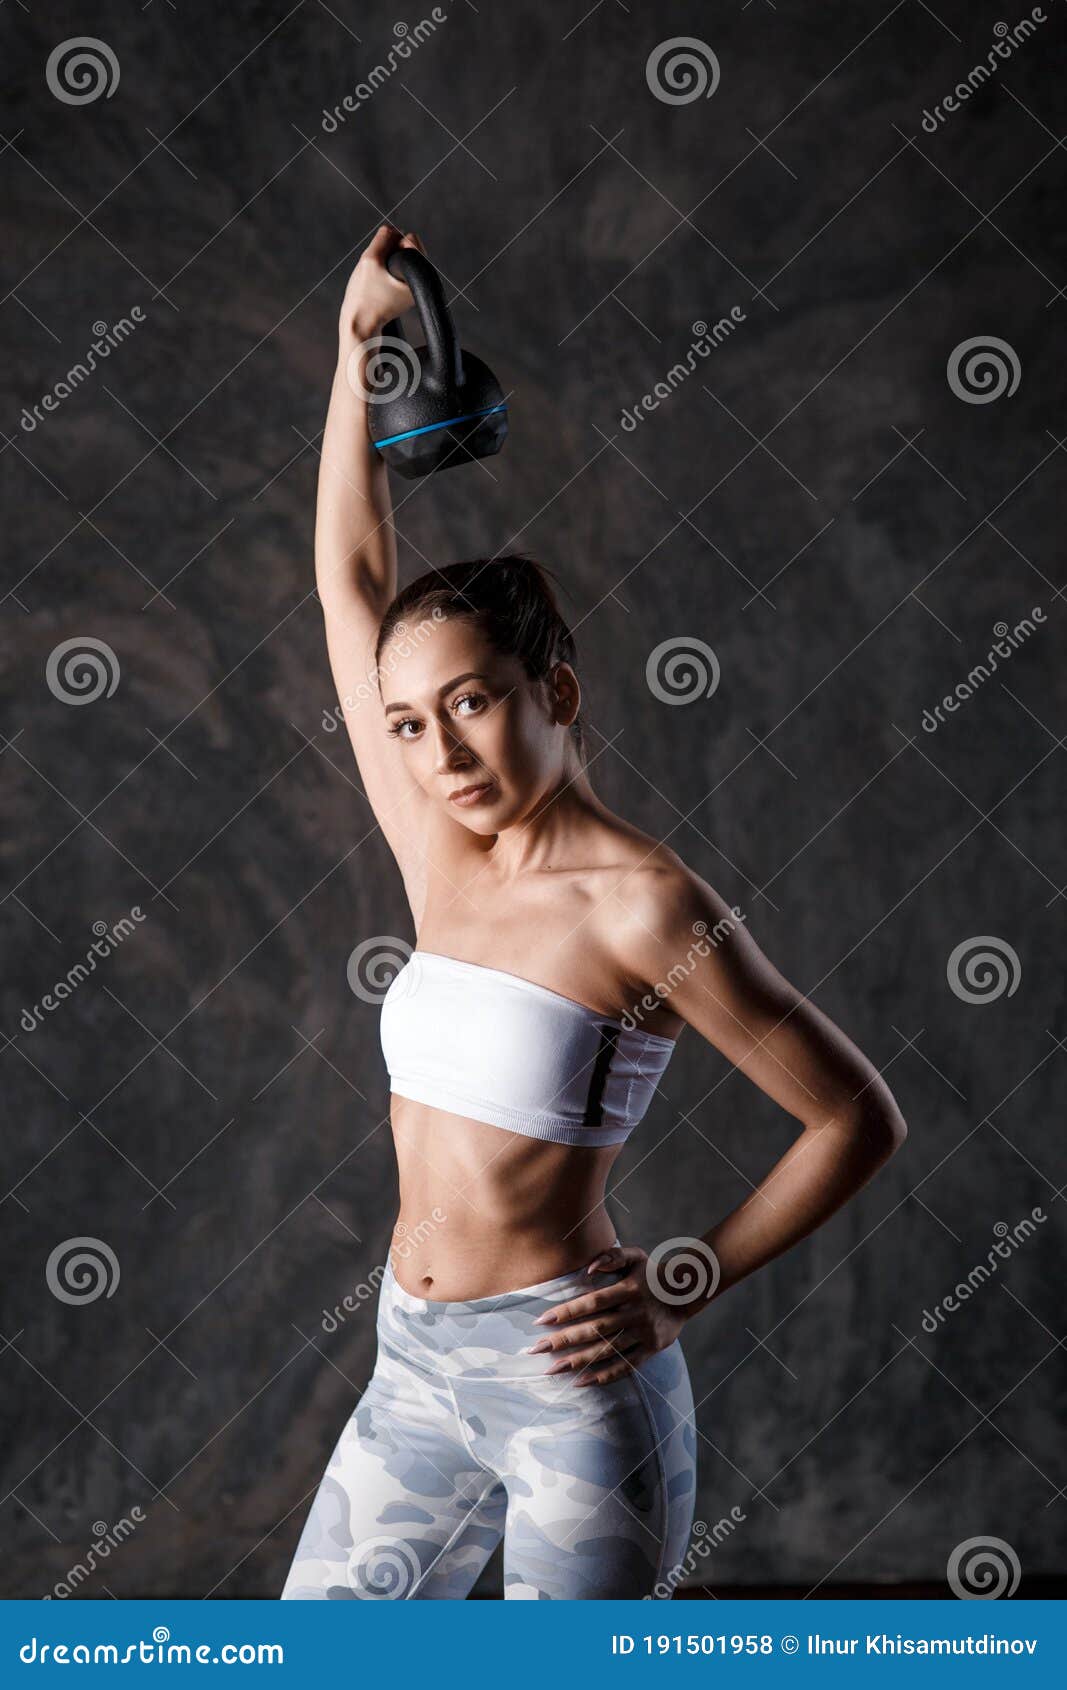 Royalty-Free photo: Photograph of woman in black sport brassiere holding  kettlebell